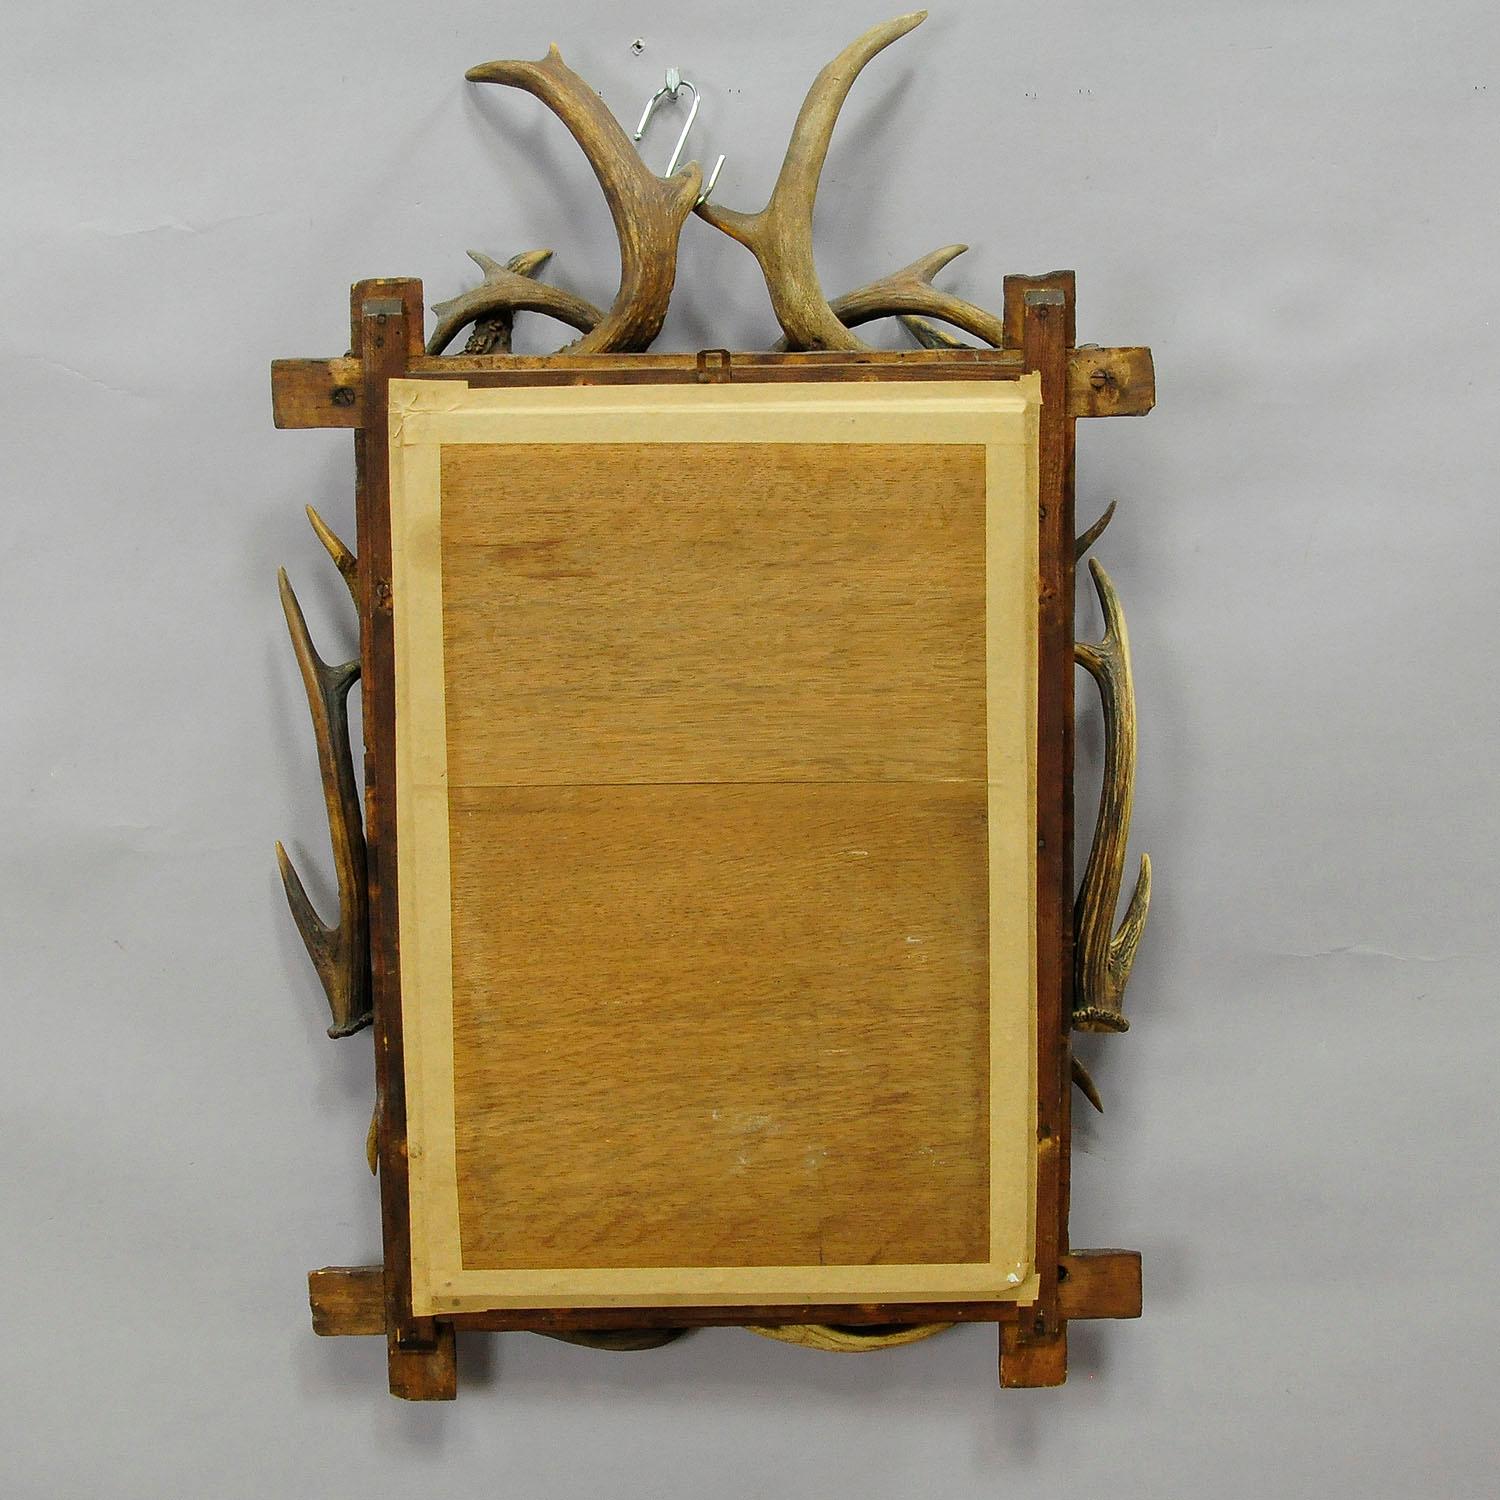 German Antique Antler Frame with Rustic Antler Decorations and Mirror